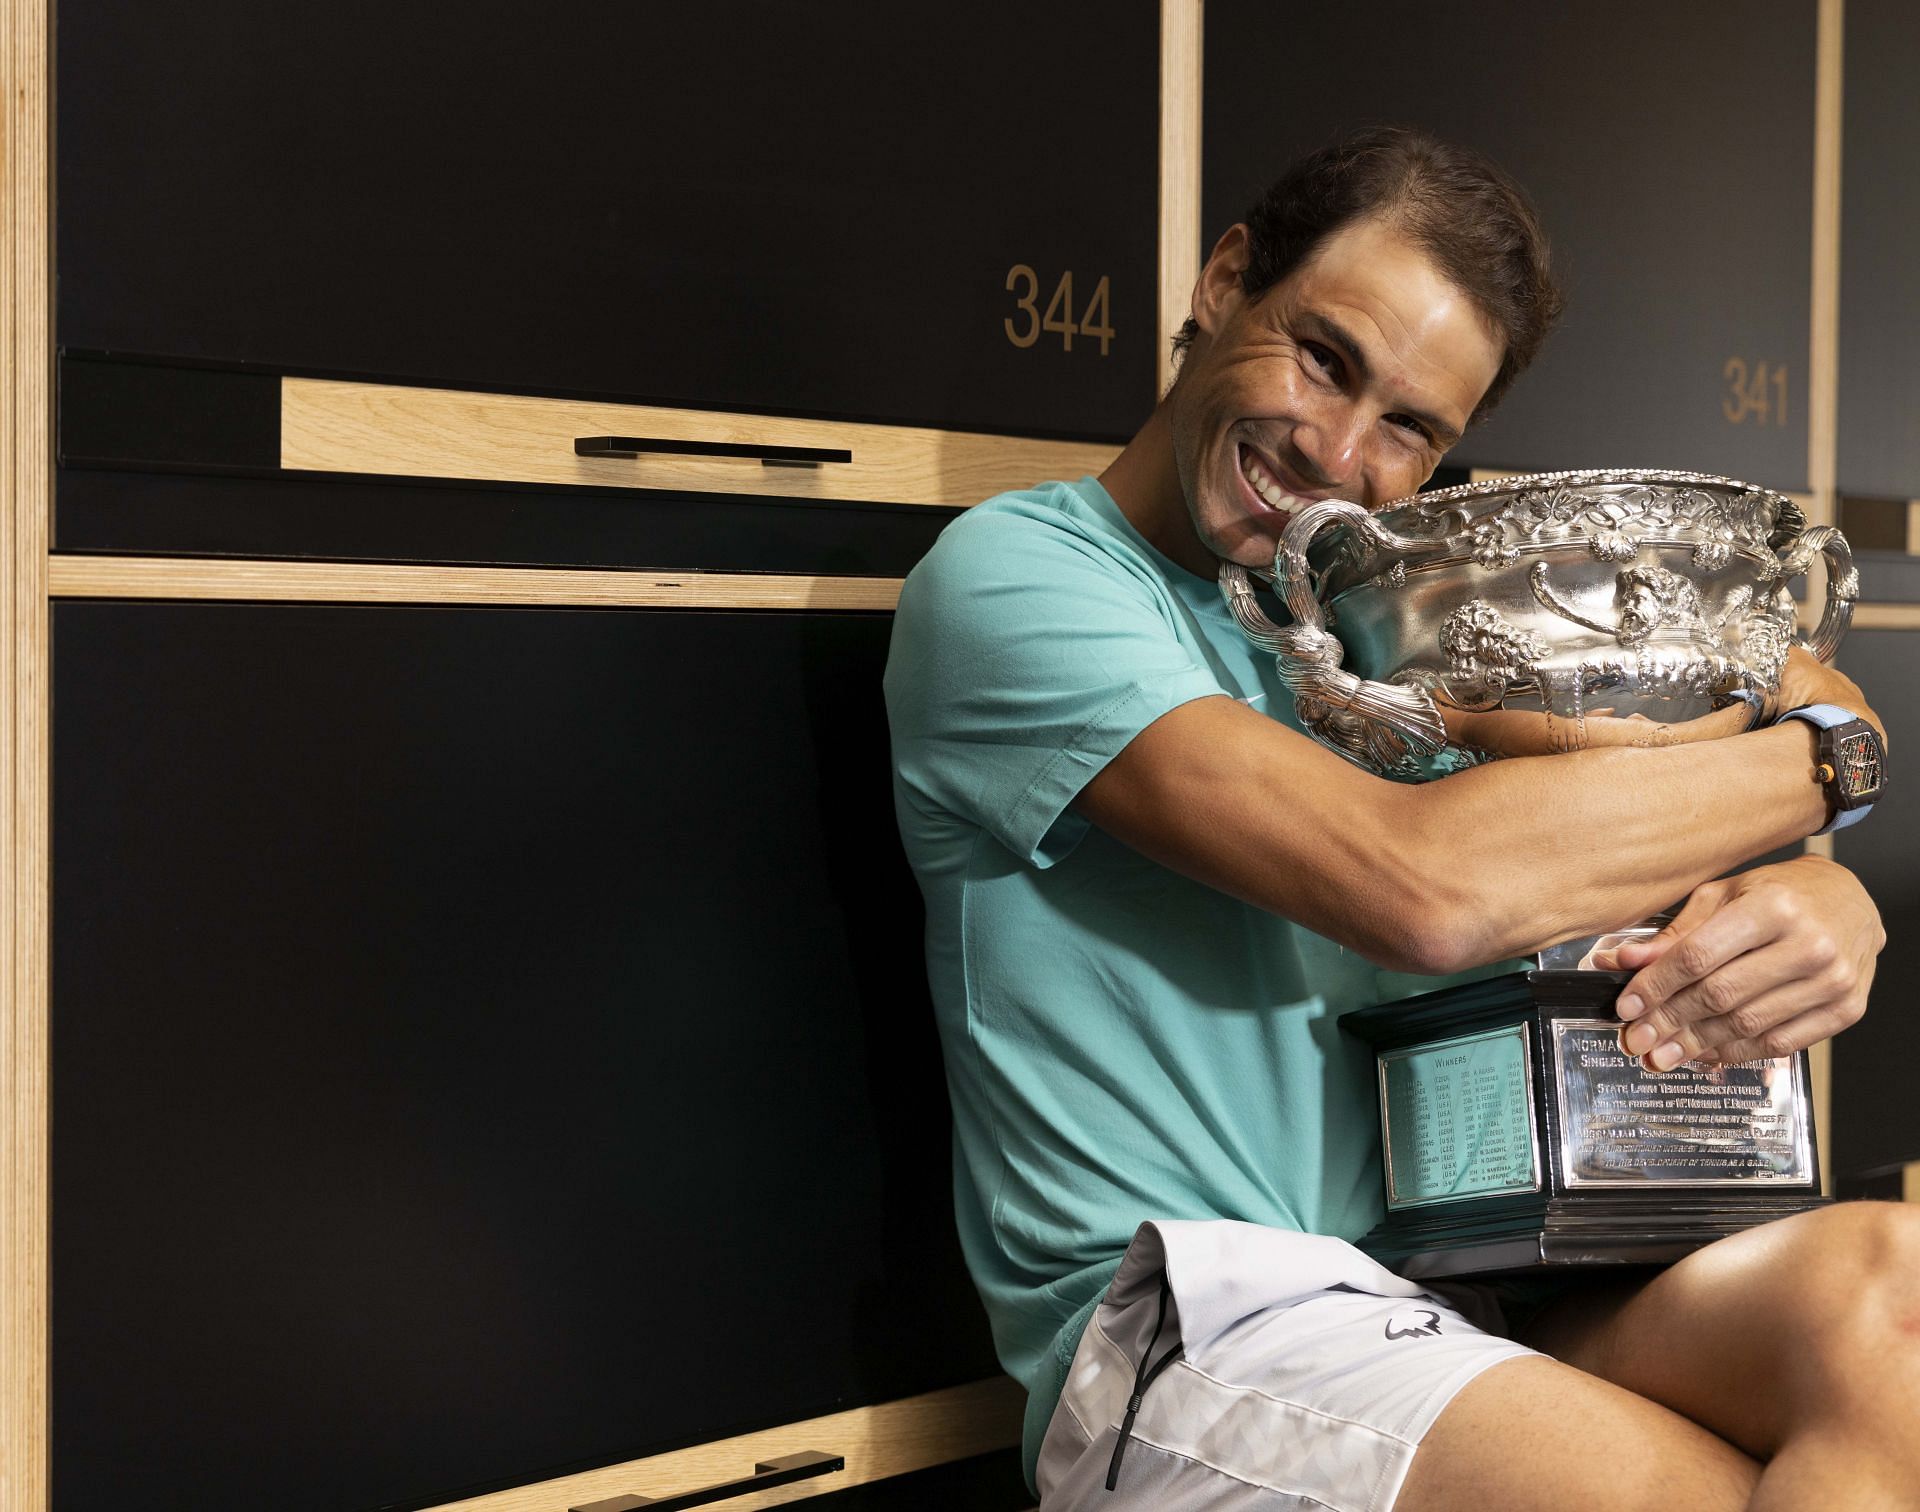 Rafael Nadal with the 2022 Australian Open trophy: Day 14